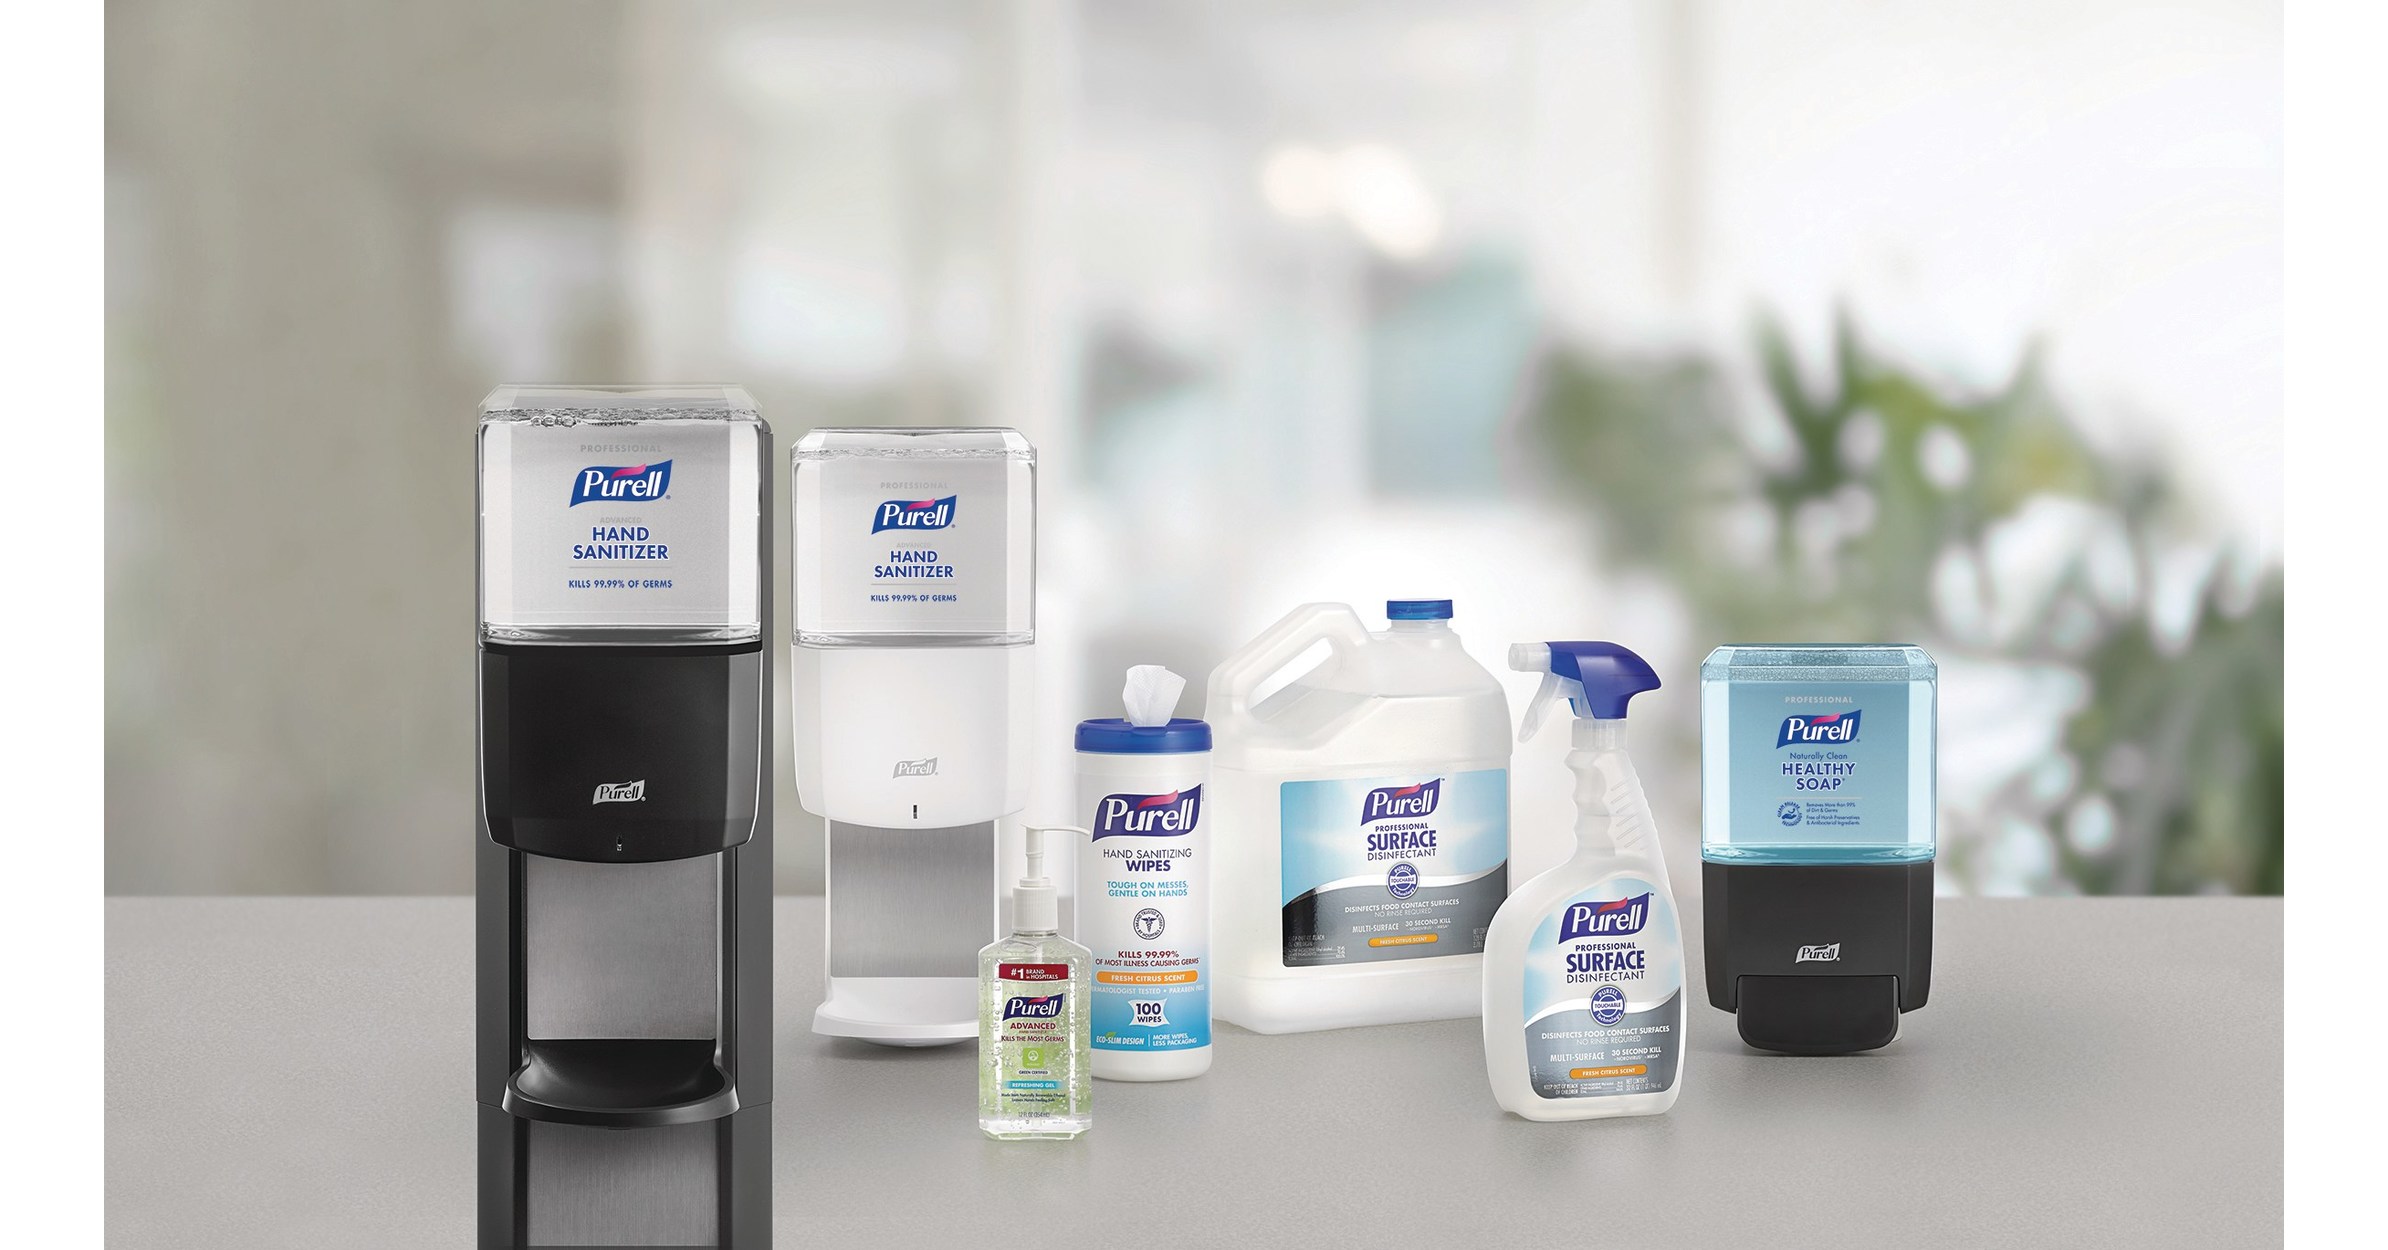 PURELL Brand Expands with Launch of Surface Wipes From: Gojo Industries